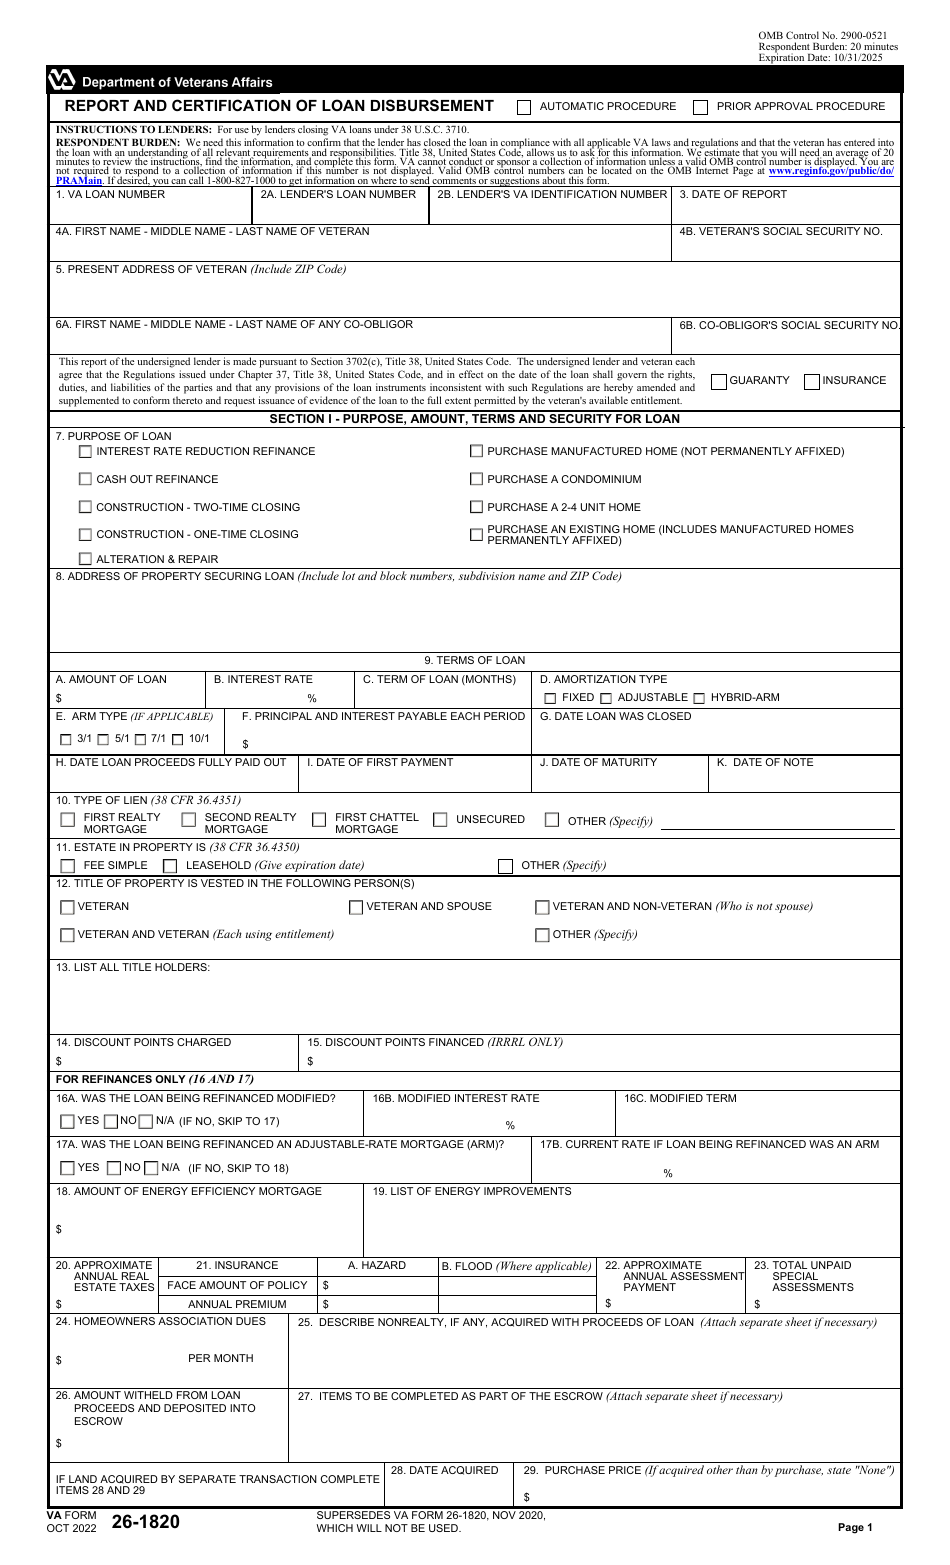 VA Form 26-1820 Report and Certification of Loan Disbursement, Page 1